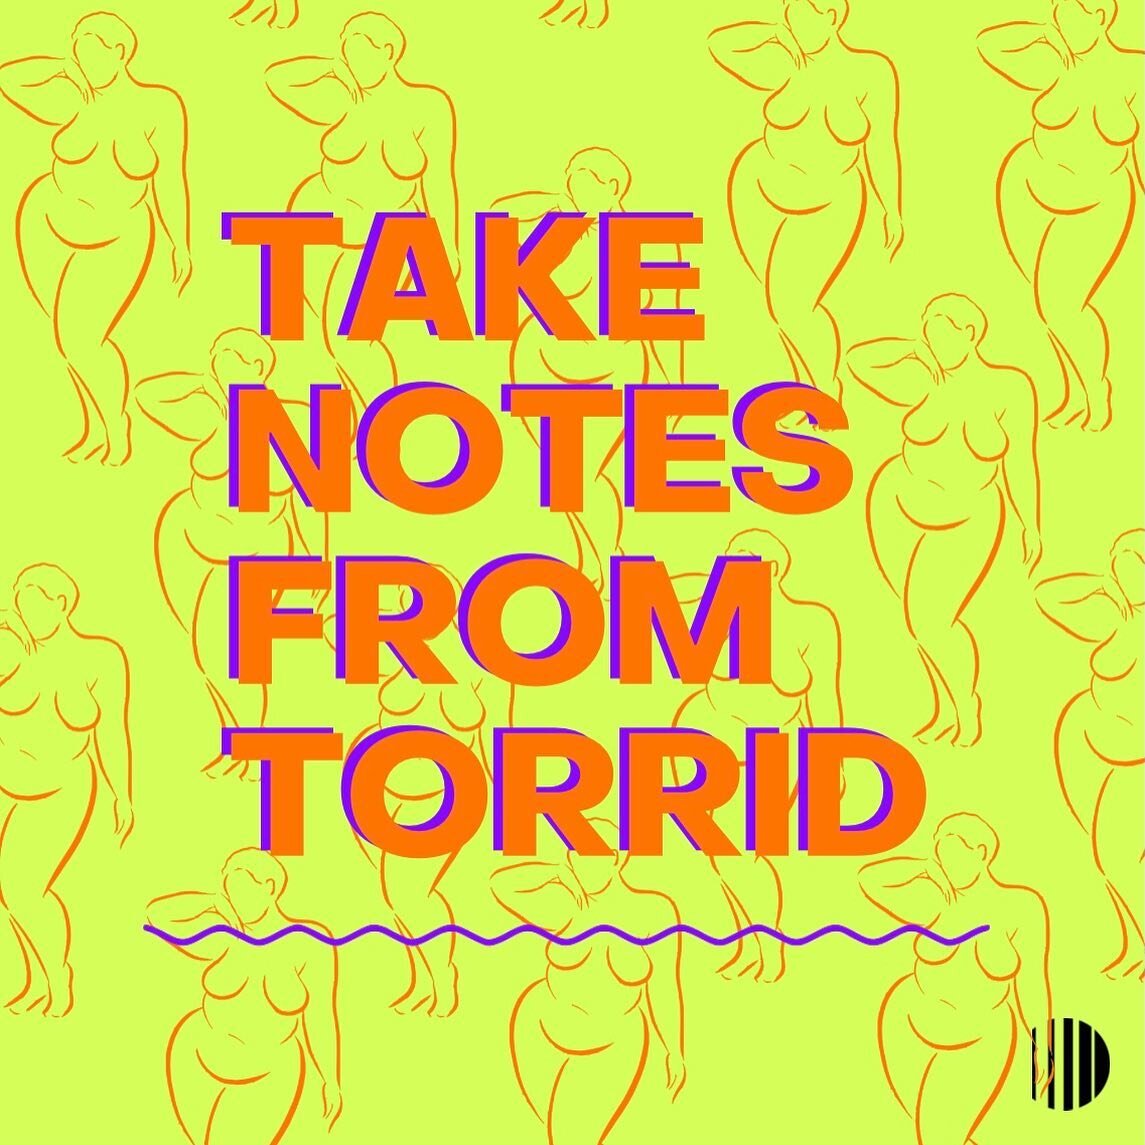 Torrid is having their momentum moment &amp; it&rsquo;s time to start taking notes. ✍🏾 #momentummasters